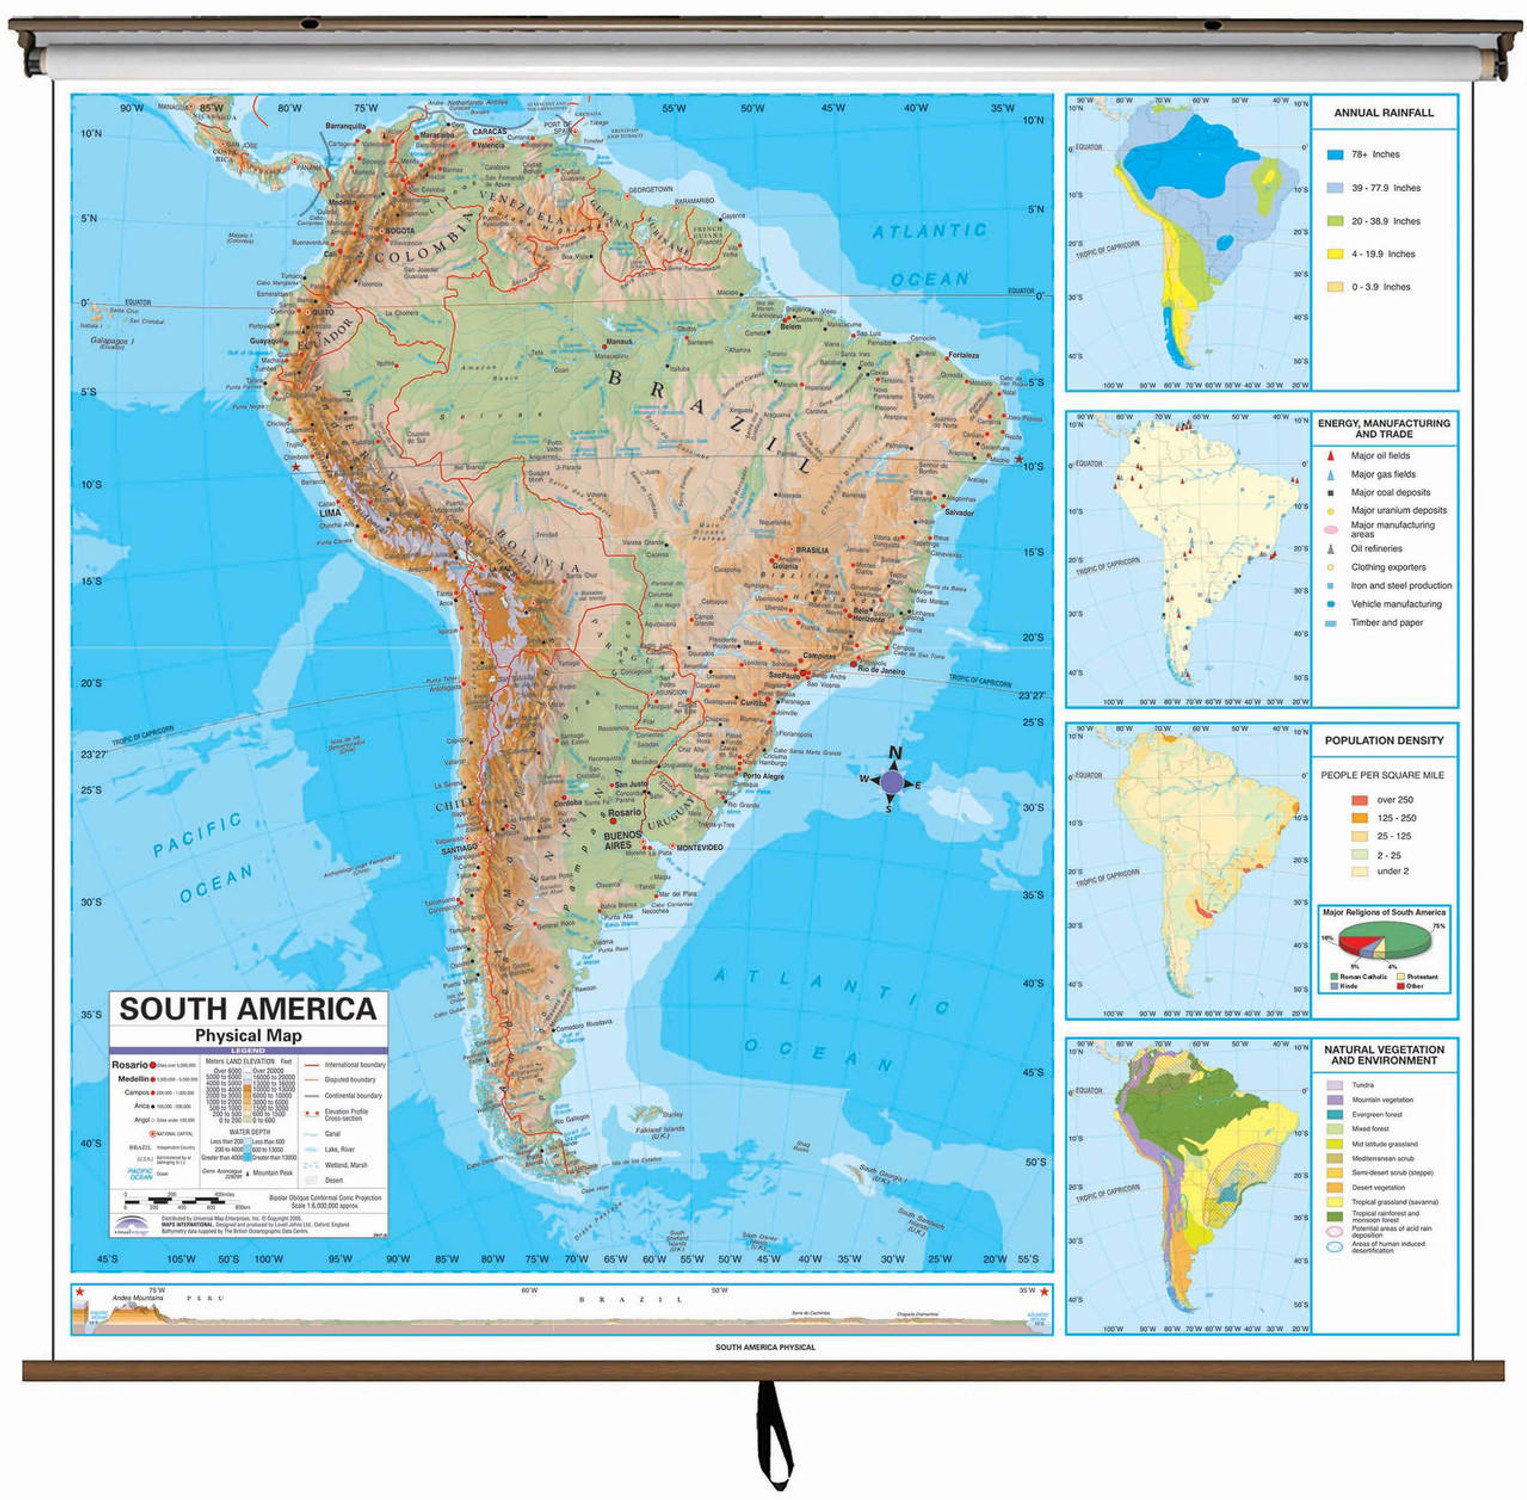 Advanced South America Physical Map on Spring Roller from Kappa Maps, image 1, World Maps Online